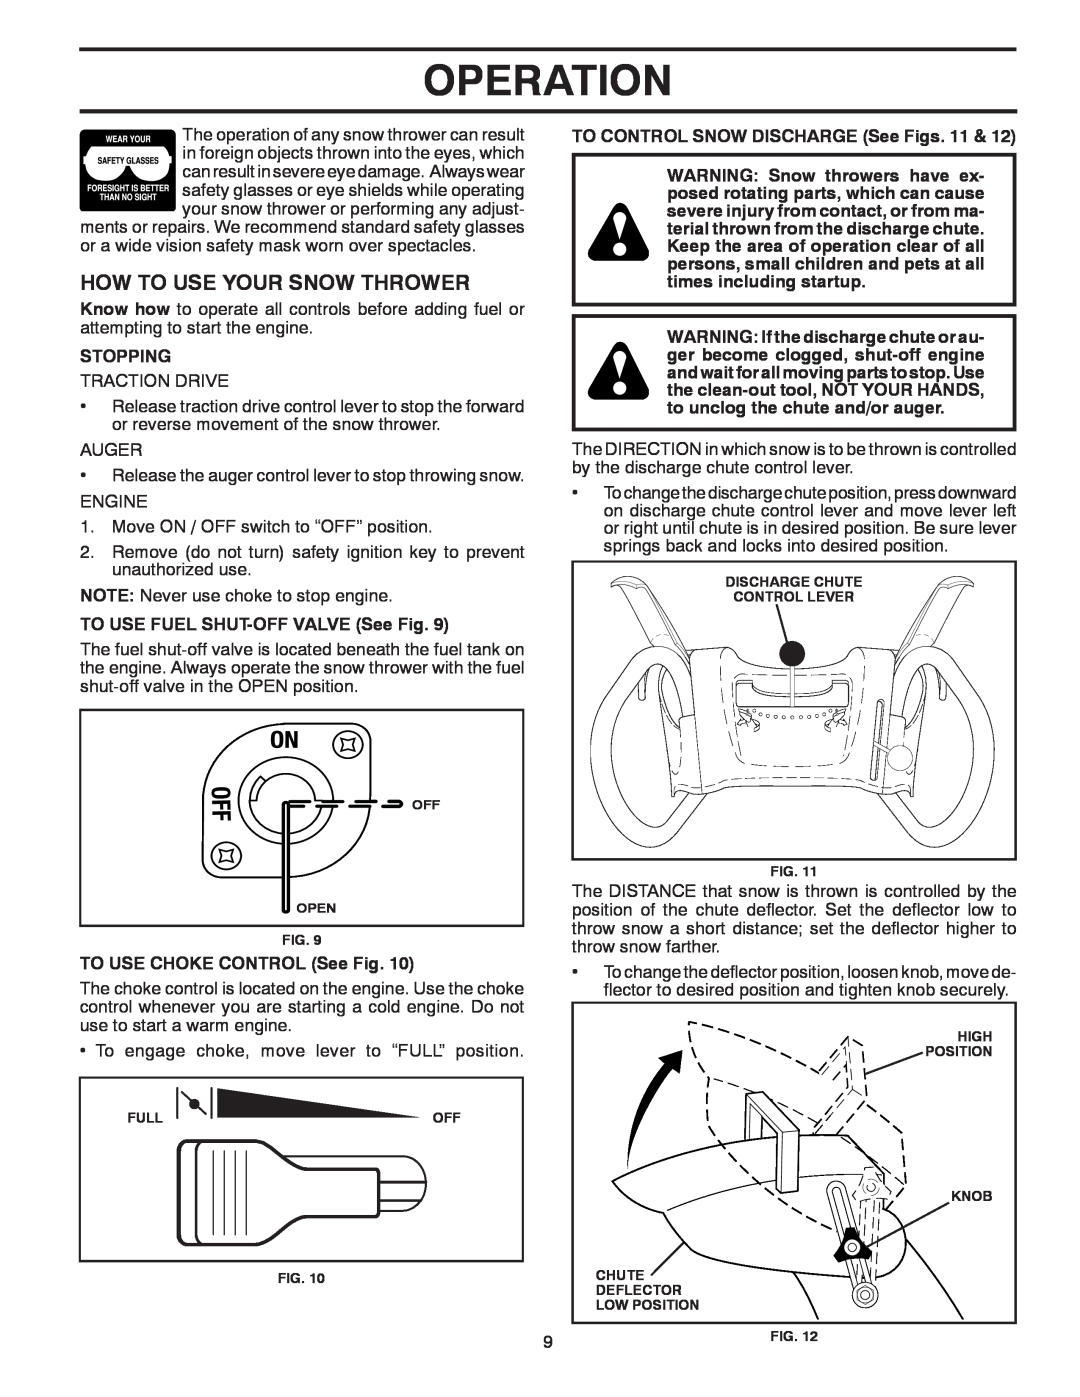 Poulan 424003 owner manual How To Use Your Snow Thrower, Operation, Stopping, TO USE FUEL SHUT-OFF VALVE See Fig 